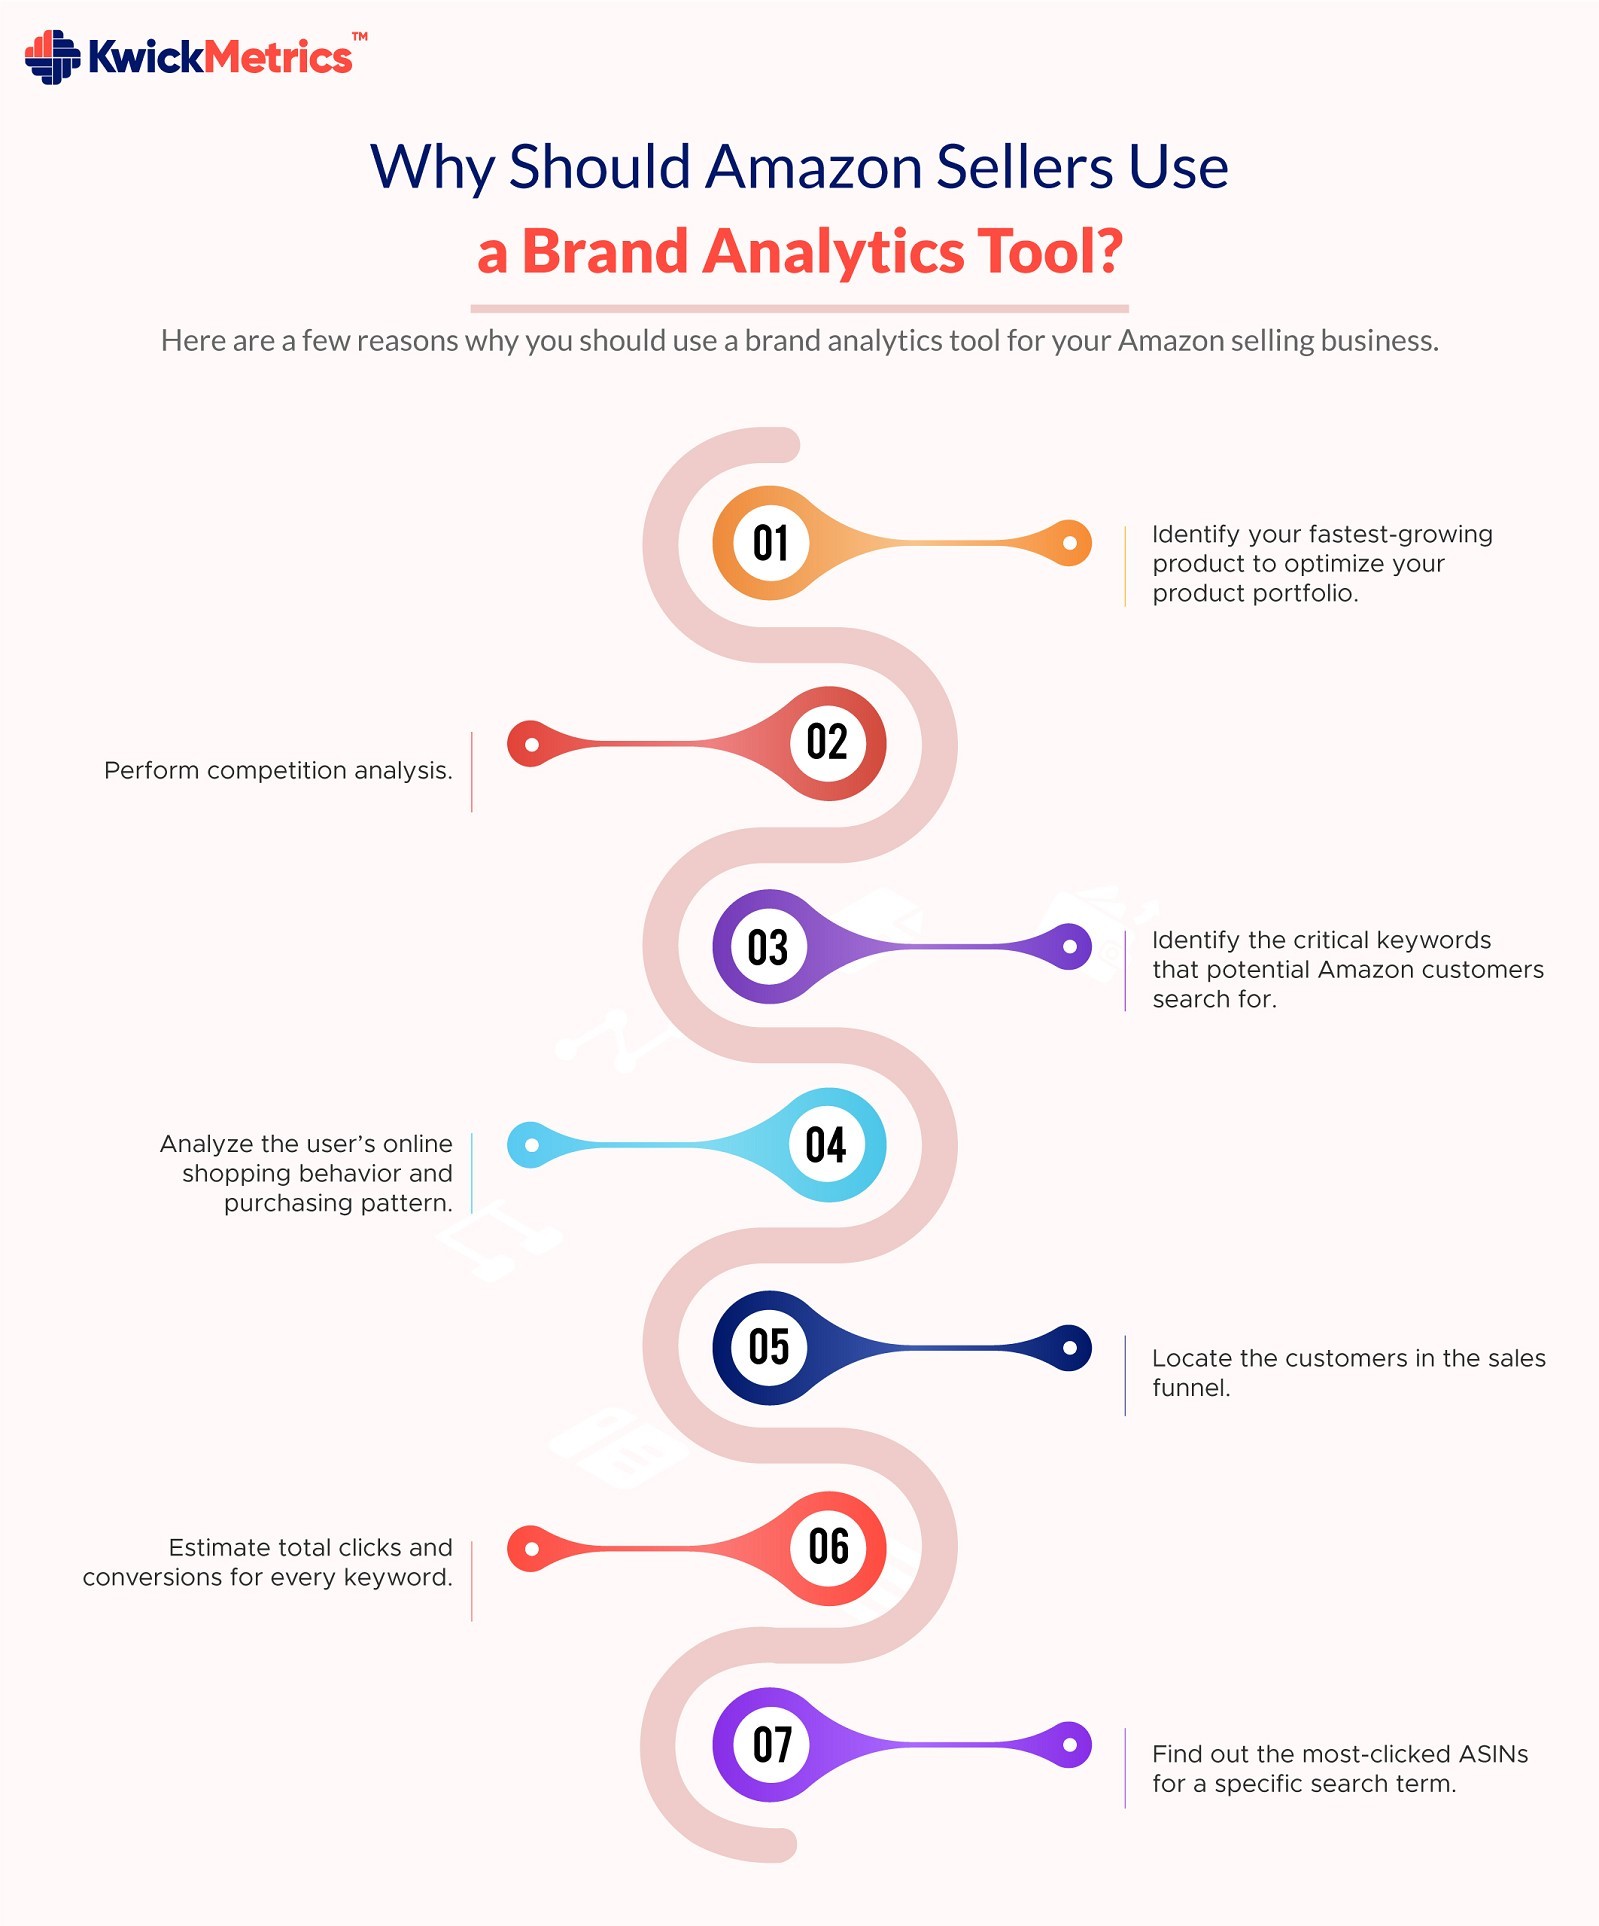 Why Should Amazon Sellers Use a Brand Analytics Tool?